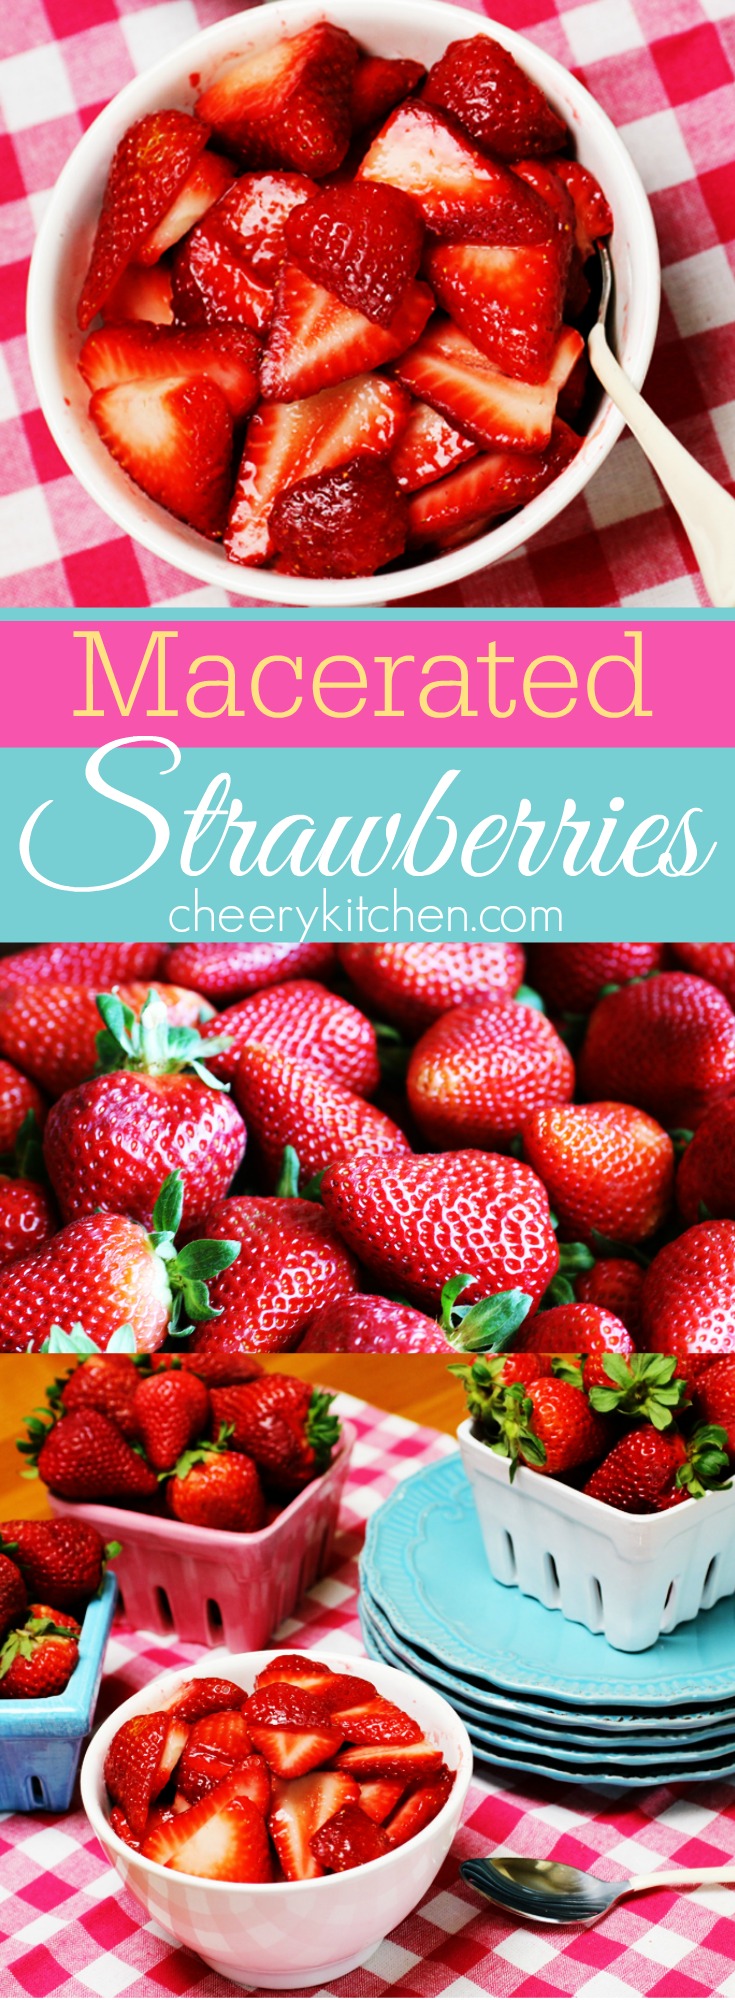 Serve or freeze macerate strawberries, all you have to do is sprinkle sugar on them, which draws out their juices so they become soft and sweet and deliciously saucy.